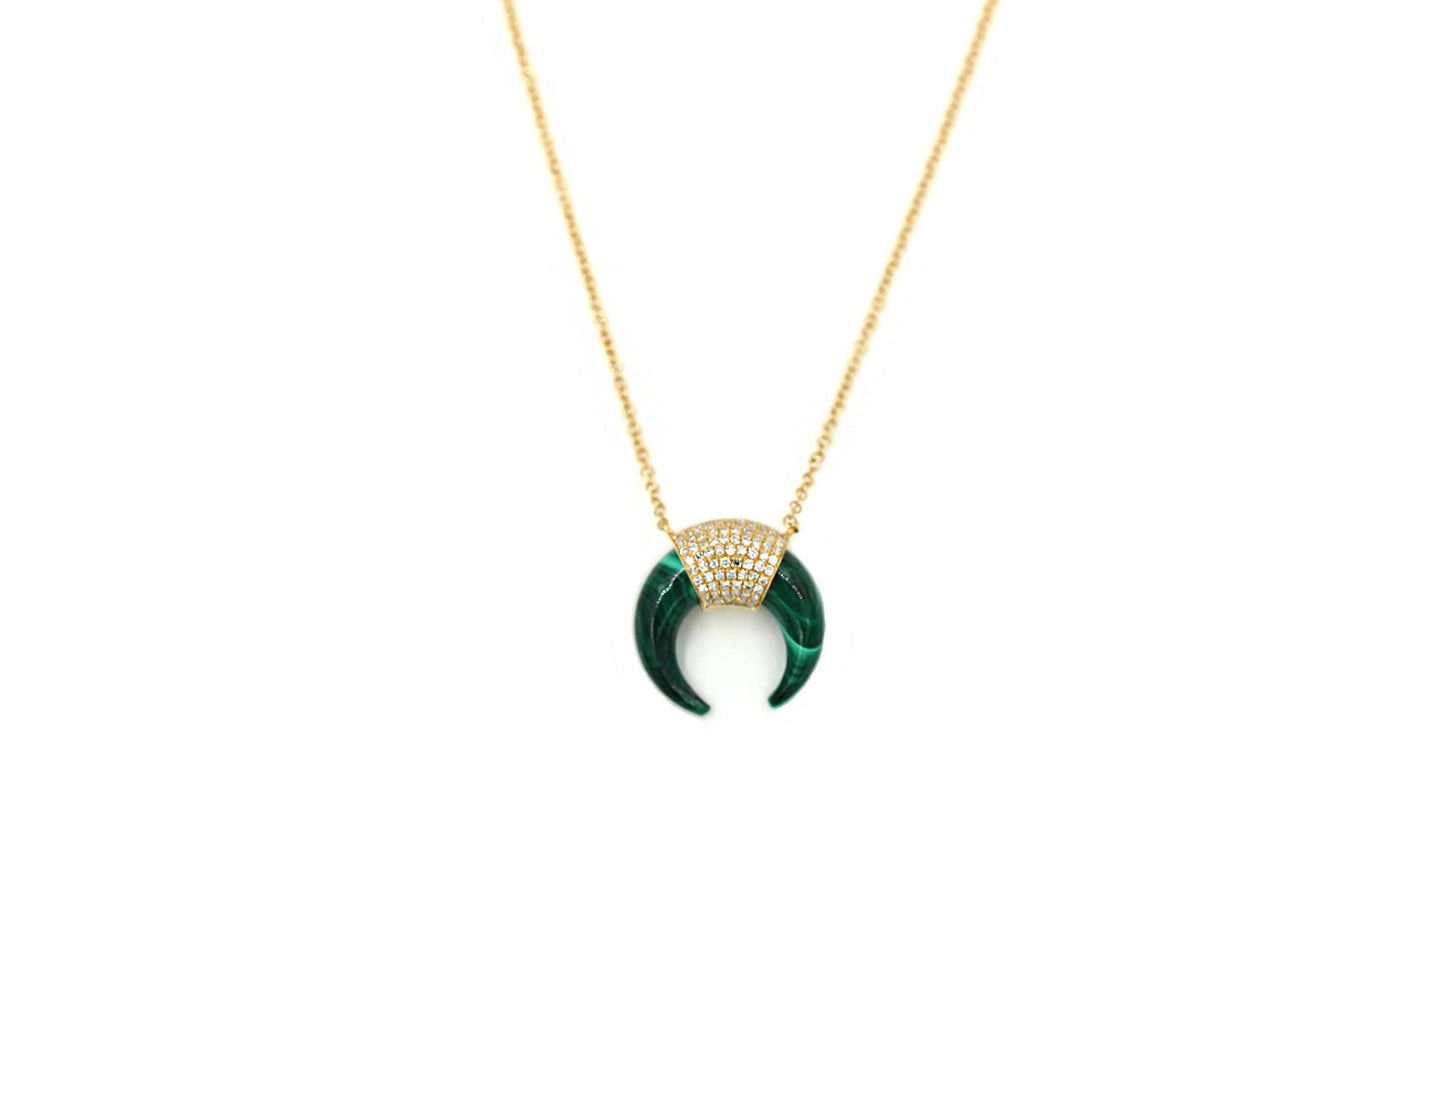 14k Yellow Gold Diamond Pave and Malachite Horn Necklace